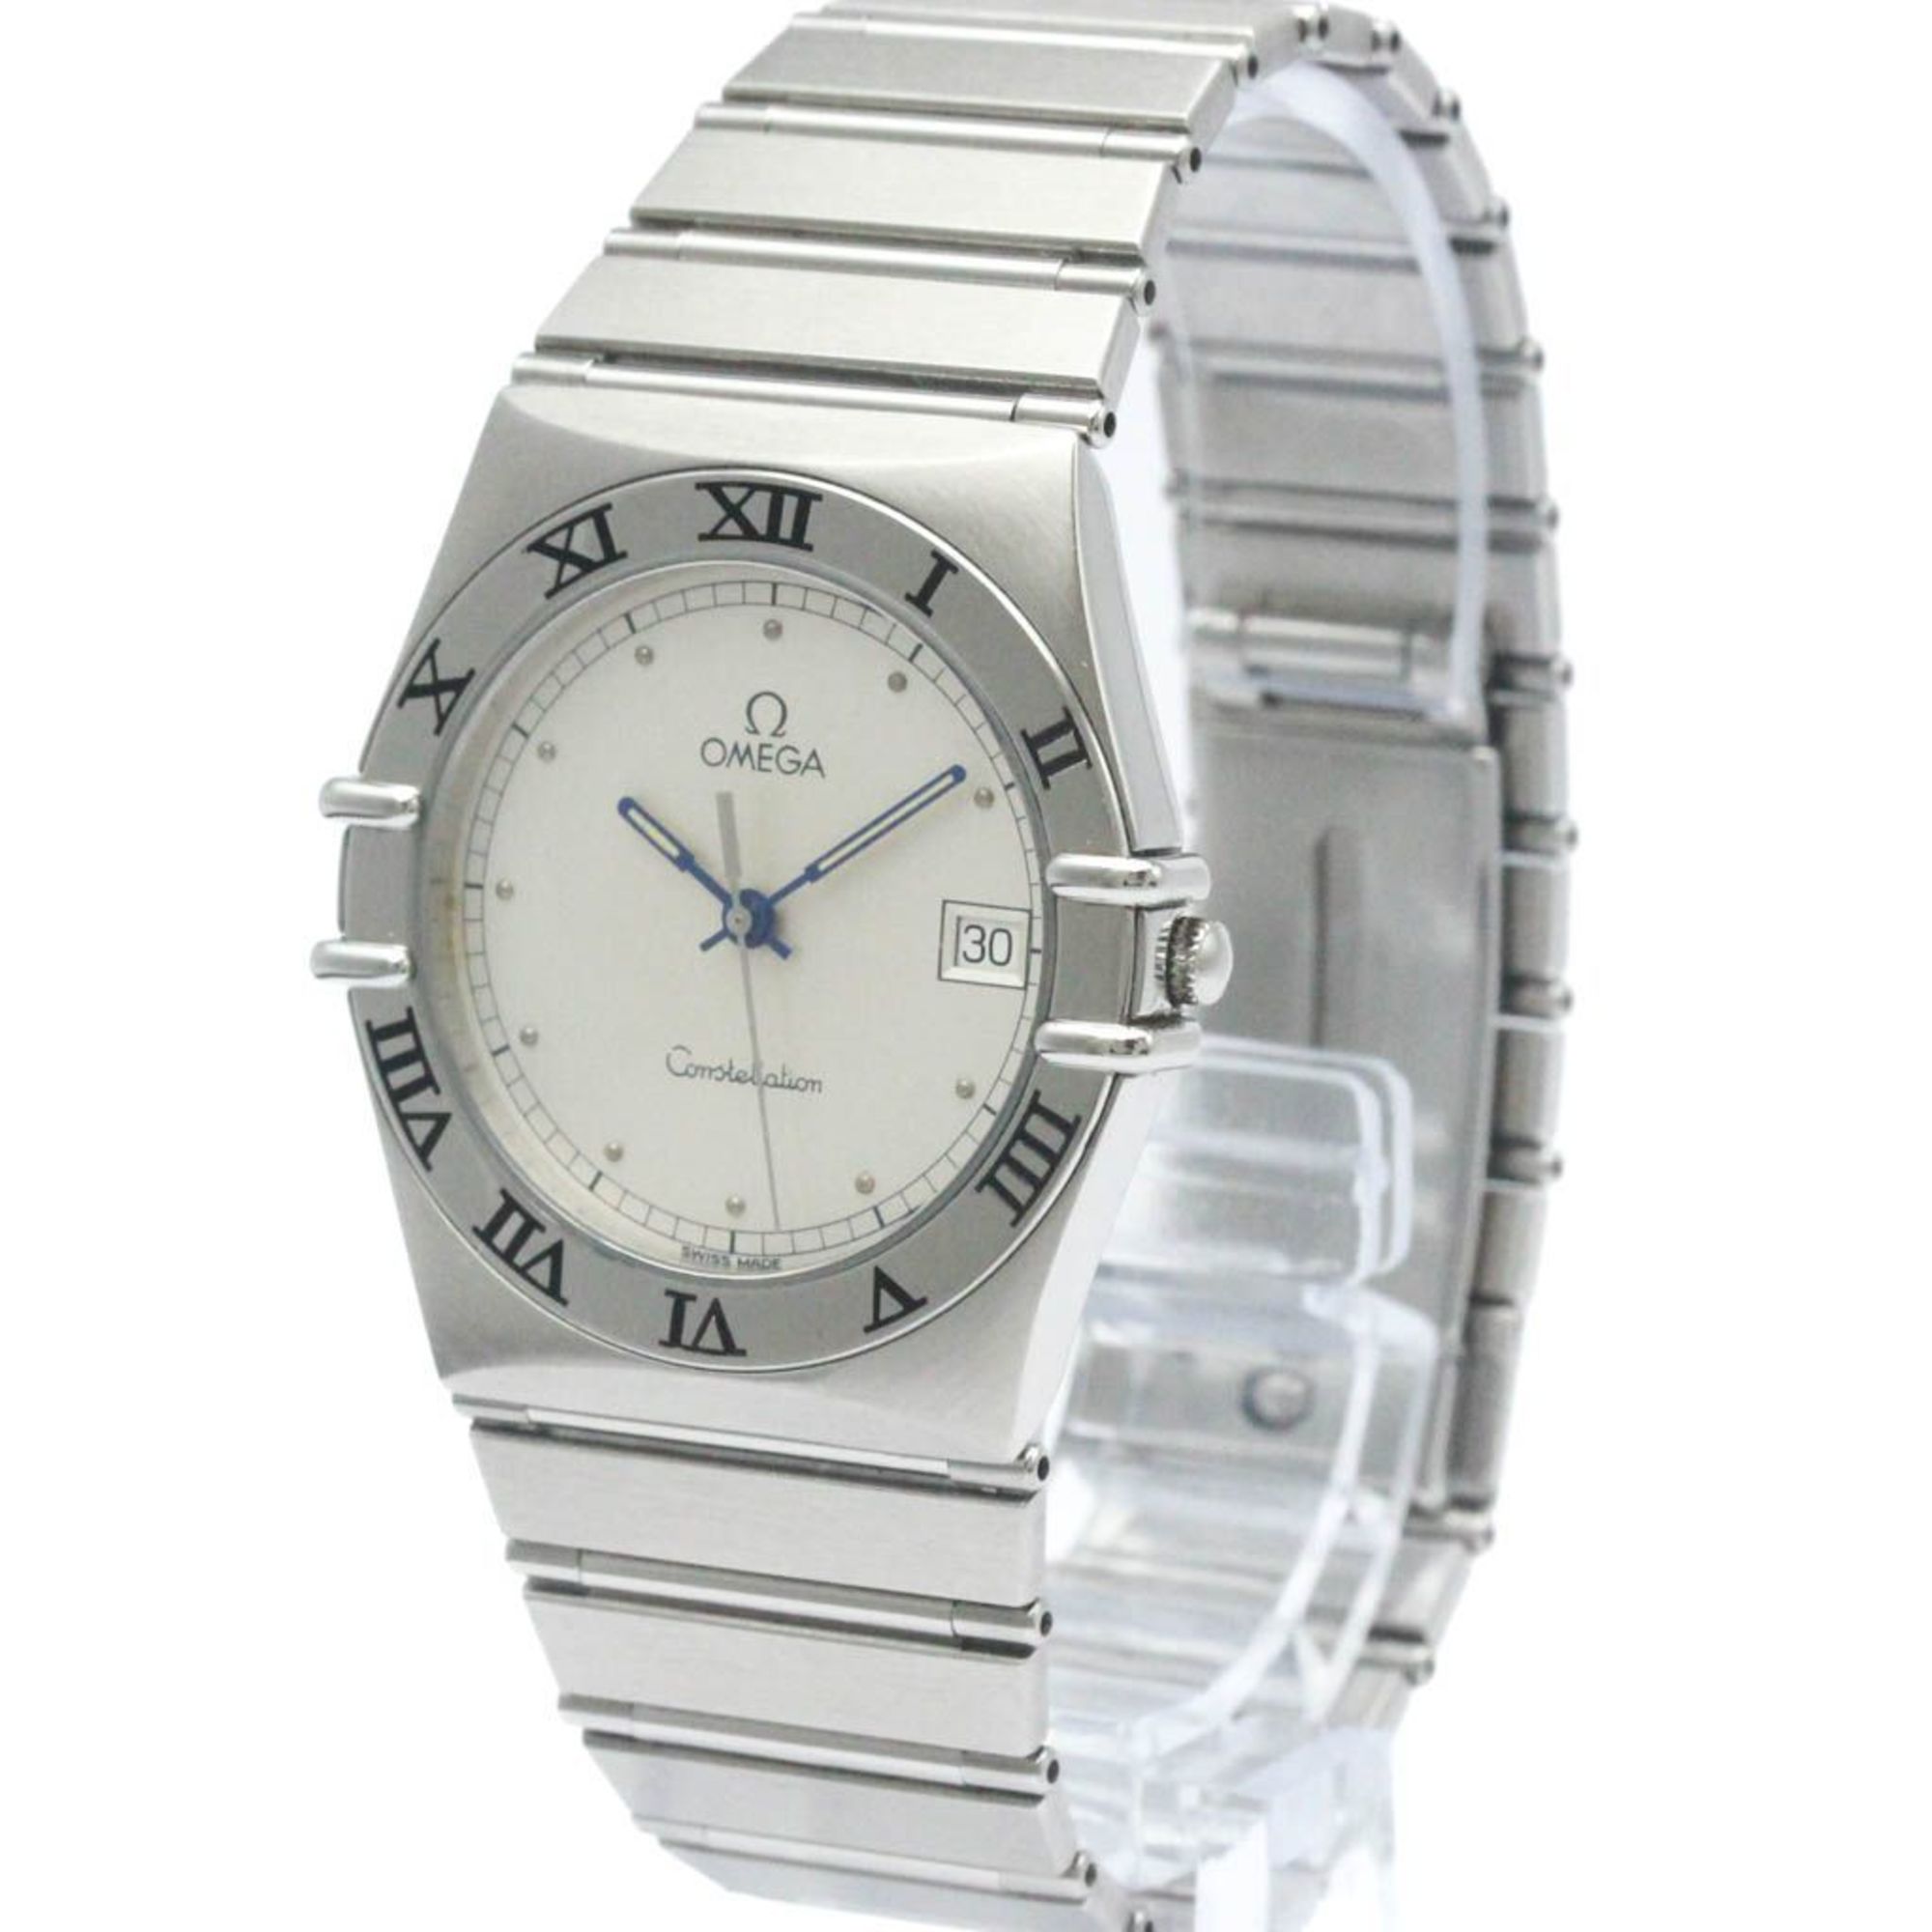 Polished OMEGA Constellation Stainless Steel Quartz Mens Watch 396.1070 BF565411